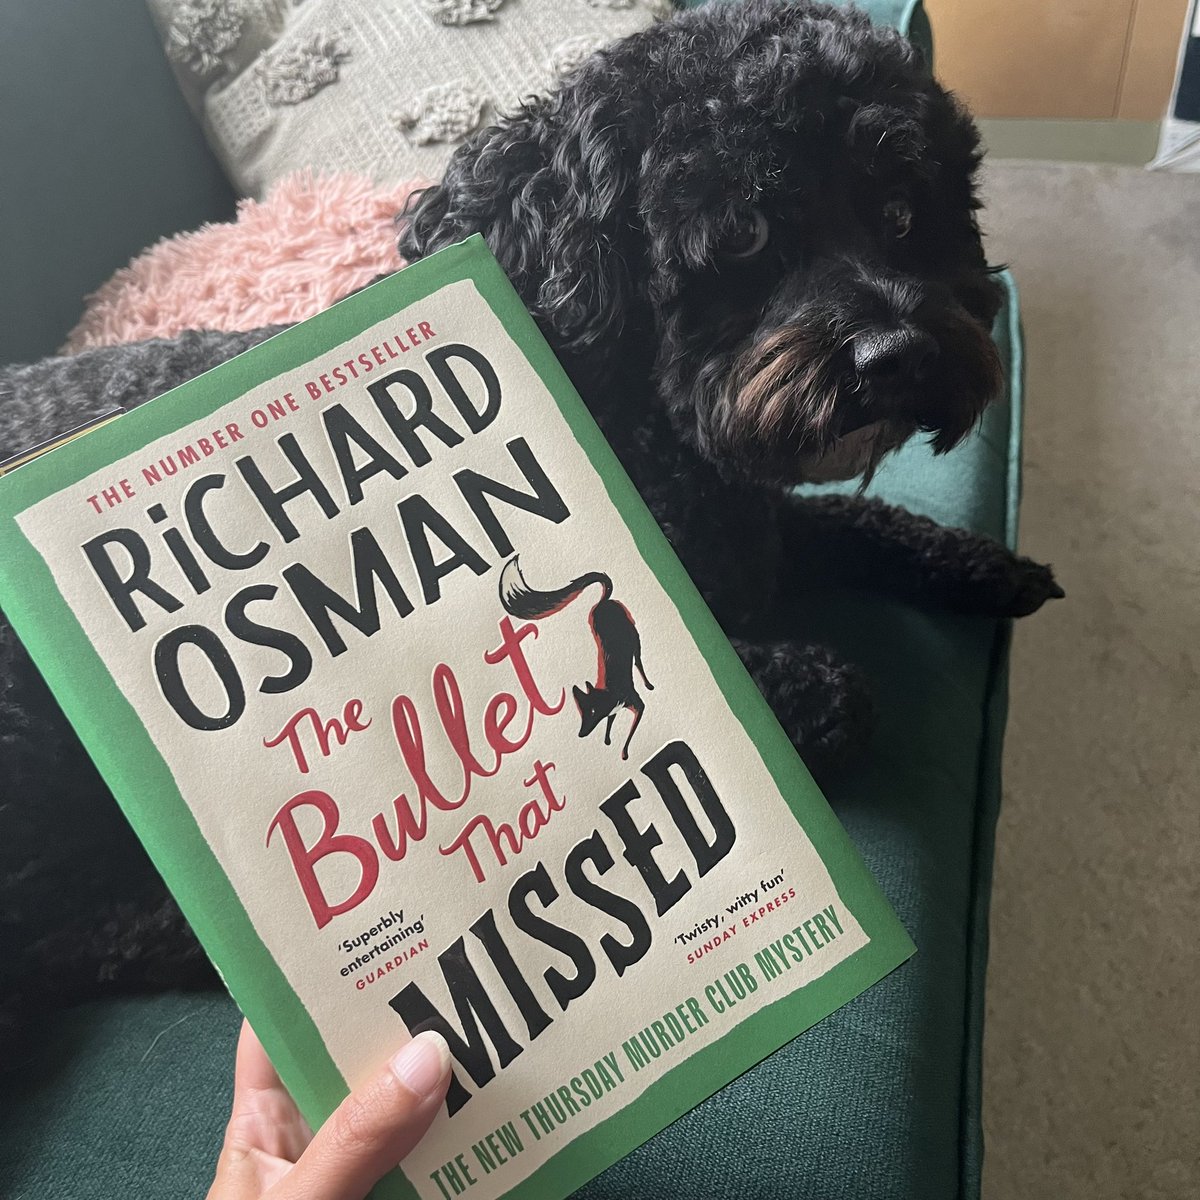 What are you reading this weekend?

I’ll be reading #TheBulletThatMissed and cuddling up on the sofa with Jeff the Cavapoo ❤️